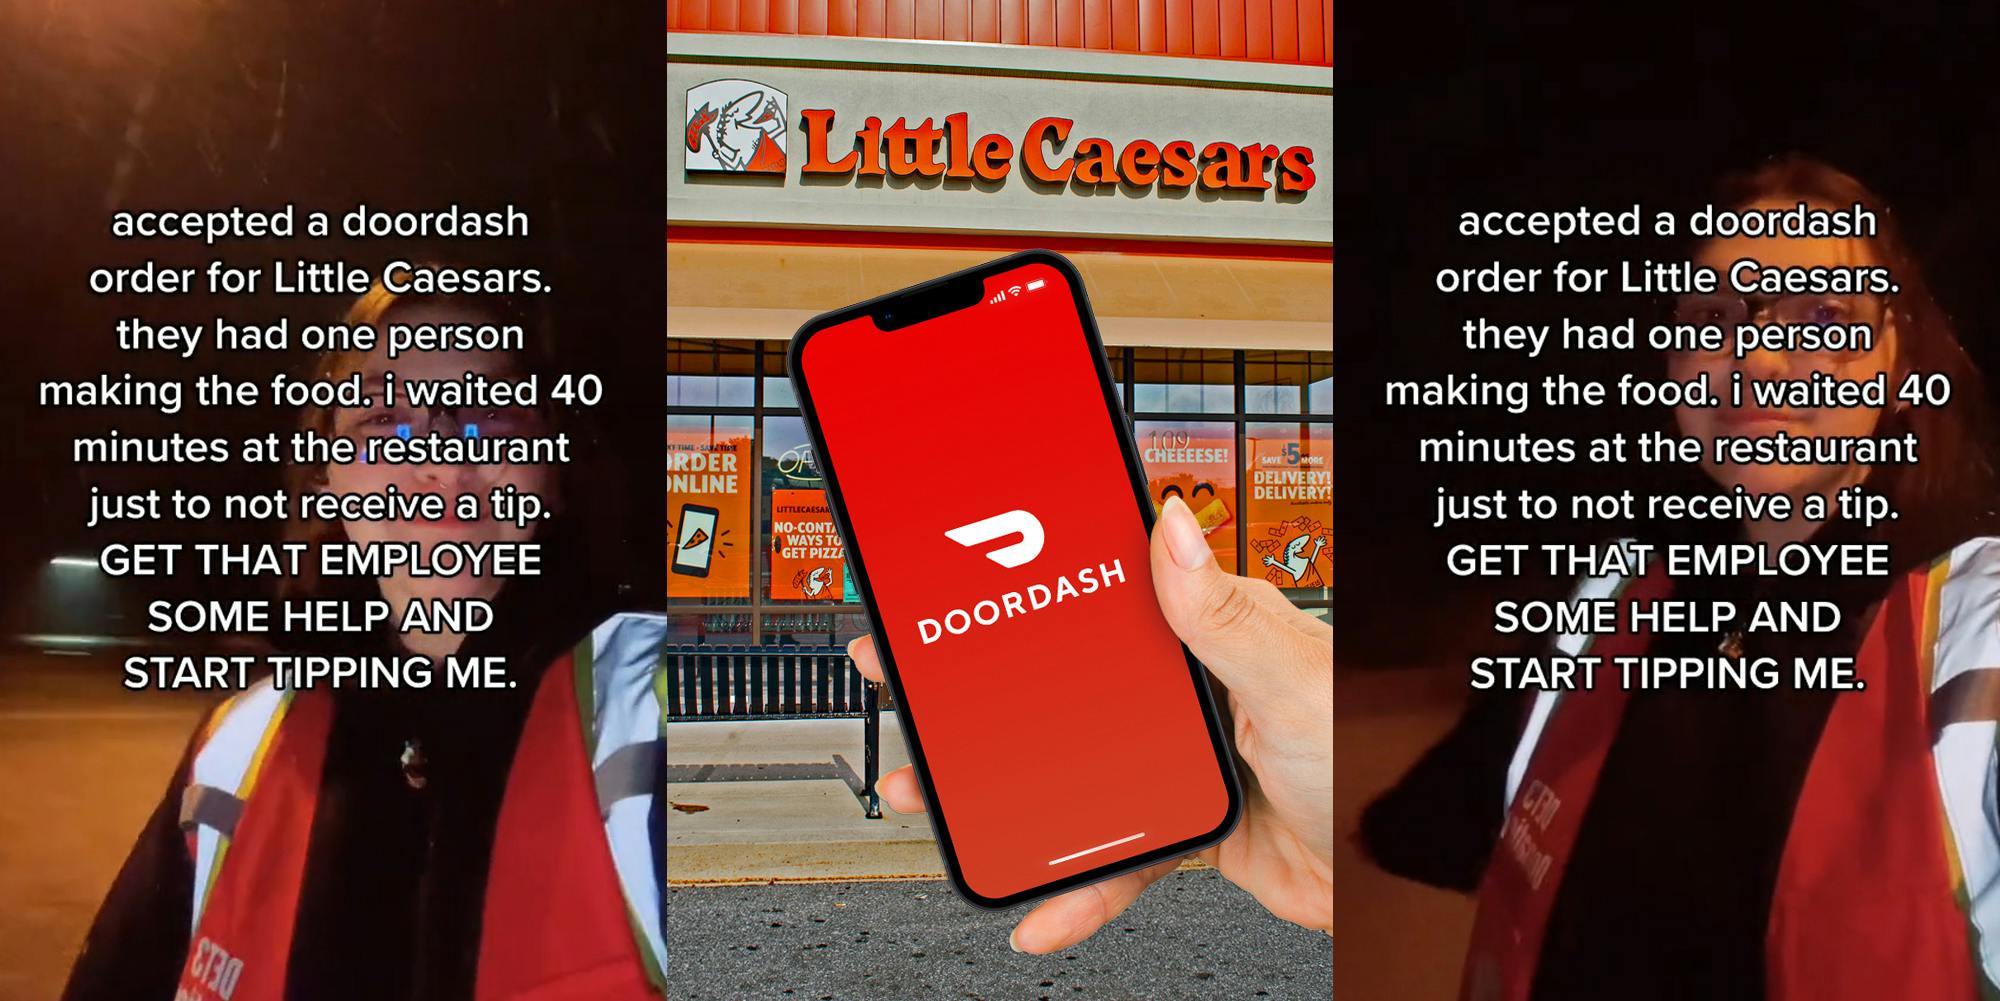 DoorDash employee outside with caption "accepted a doordash order for Little Caesars, they had one person making the food. i waited 40 minutes at the restaurant just to not receive a tip, GET THAT EMPLOYEE SOME HELP AND START TIPPING ME." (l) Little Caesars building with sign with hand holding phone with DoorDash on screen in front (c) DoorDash employee outside with caption "accepted a doordash order for Little Caesars, they had one person making the food. i waited 40 minutes at the restaurant just to not receive a tip, GET THAT EMPLOYEE SOME HELP AND START TIPPING ME." (r)